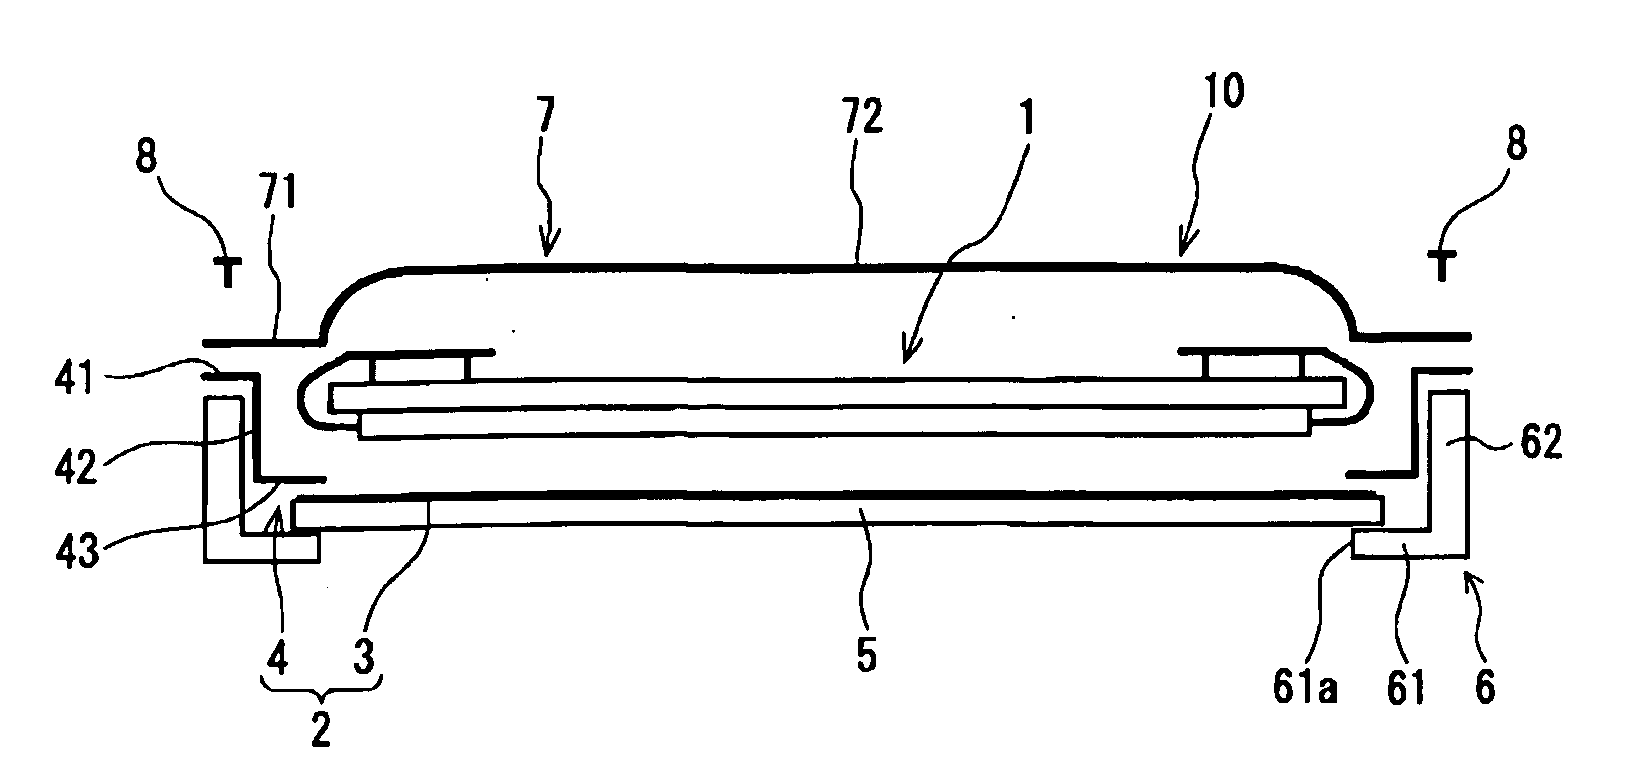 Shield structure for electronic device